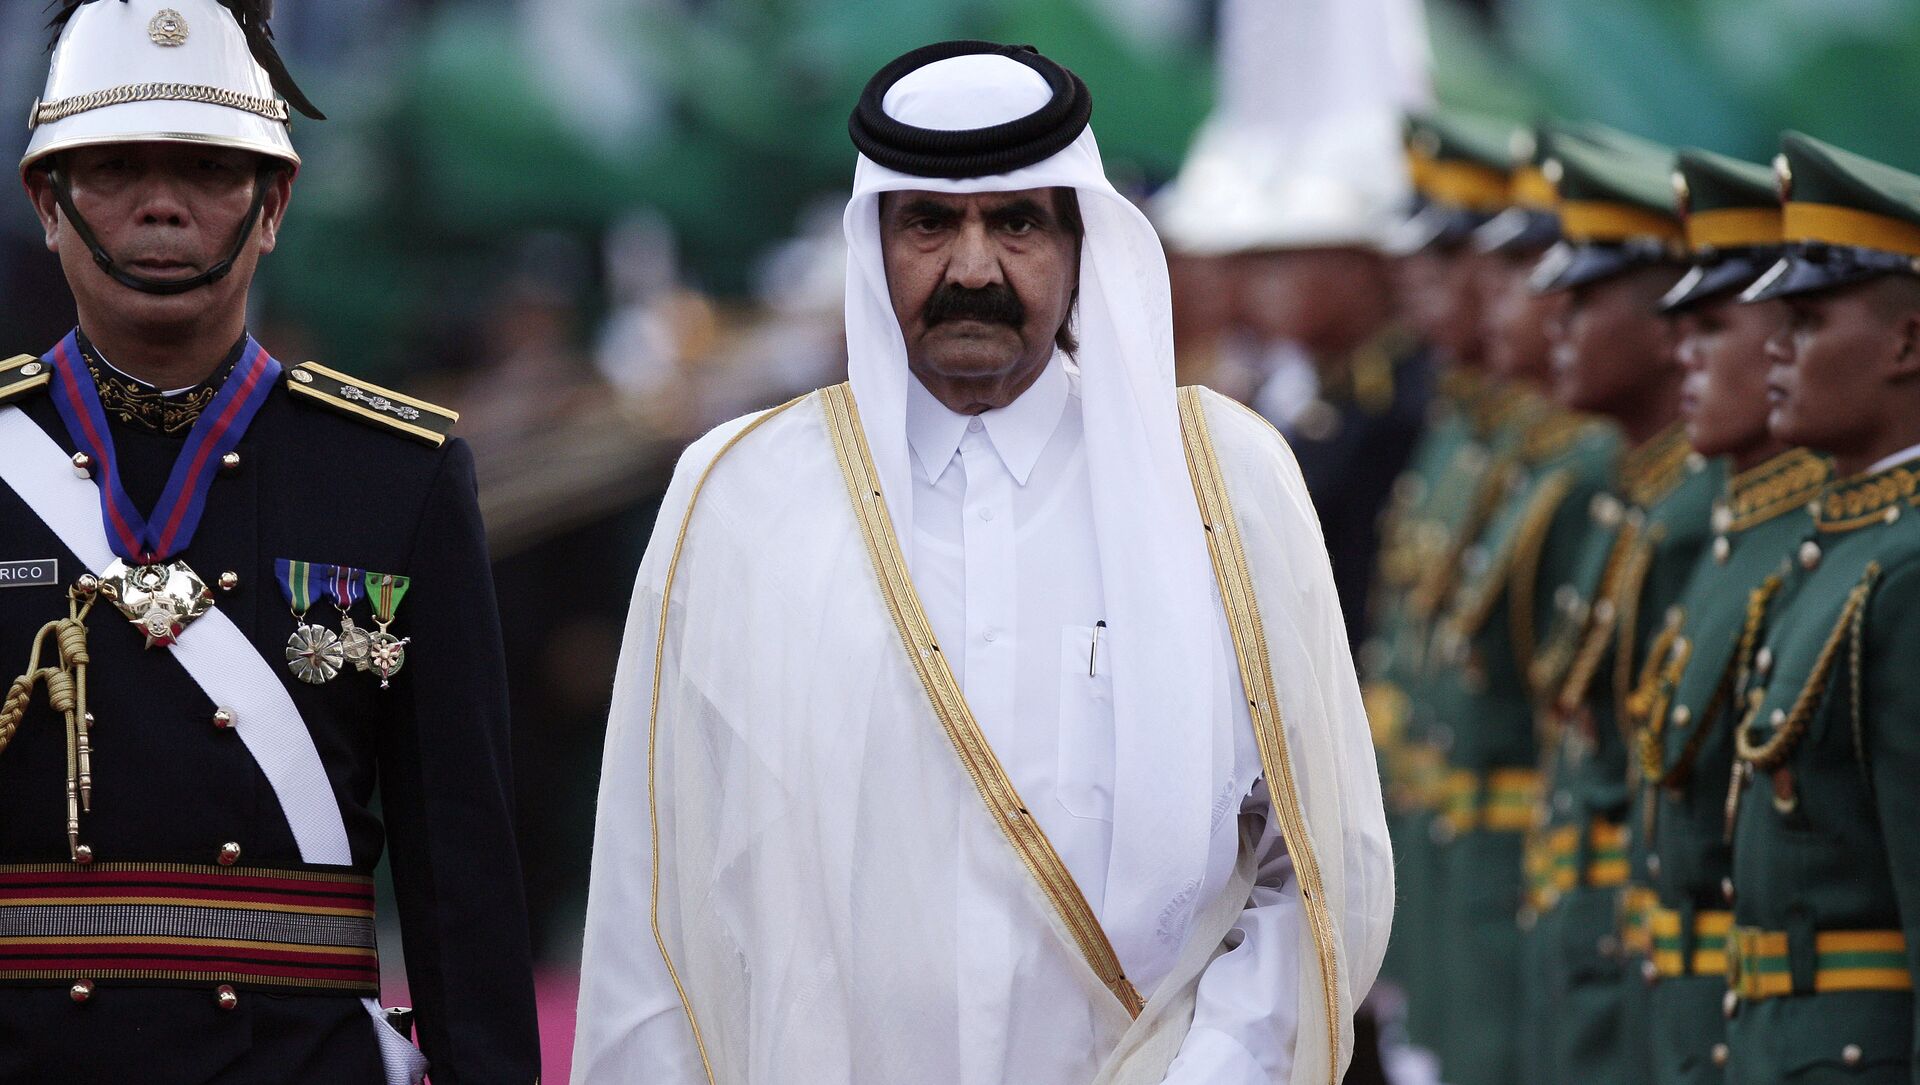 Sheikh Hamad Bin Khalifa Al-Thani, walks beside Philippine troopers during arrival honors at the Malacanang palace in Manila, Philippines on Tuesday April 10, 2012. - اسپوتنیک افغانستان  , 1920, 31.08.2021